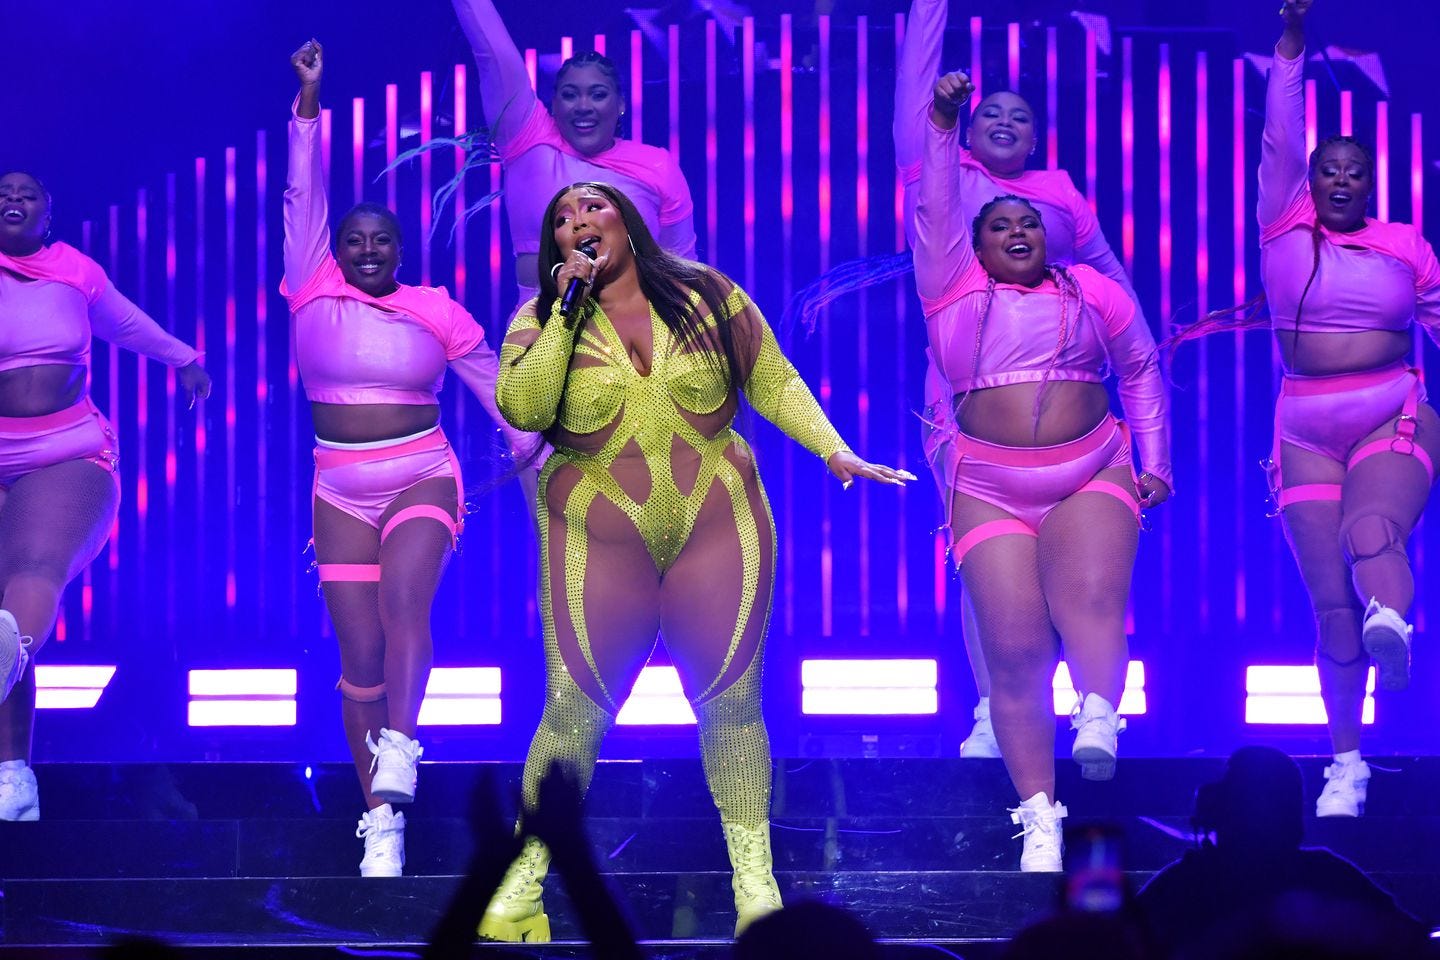 Lizzo performs onstage in a sparky yellow costume, with her dancers behind her in pink athletic costumes